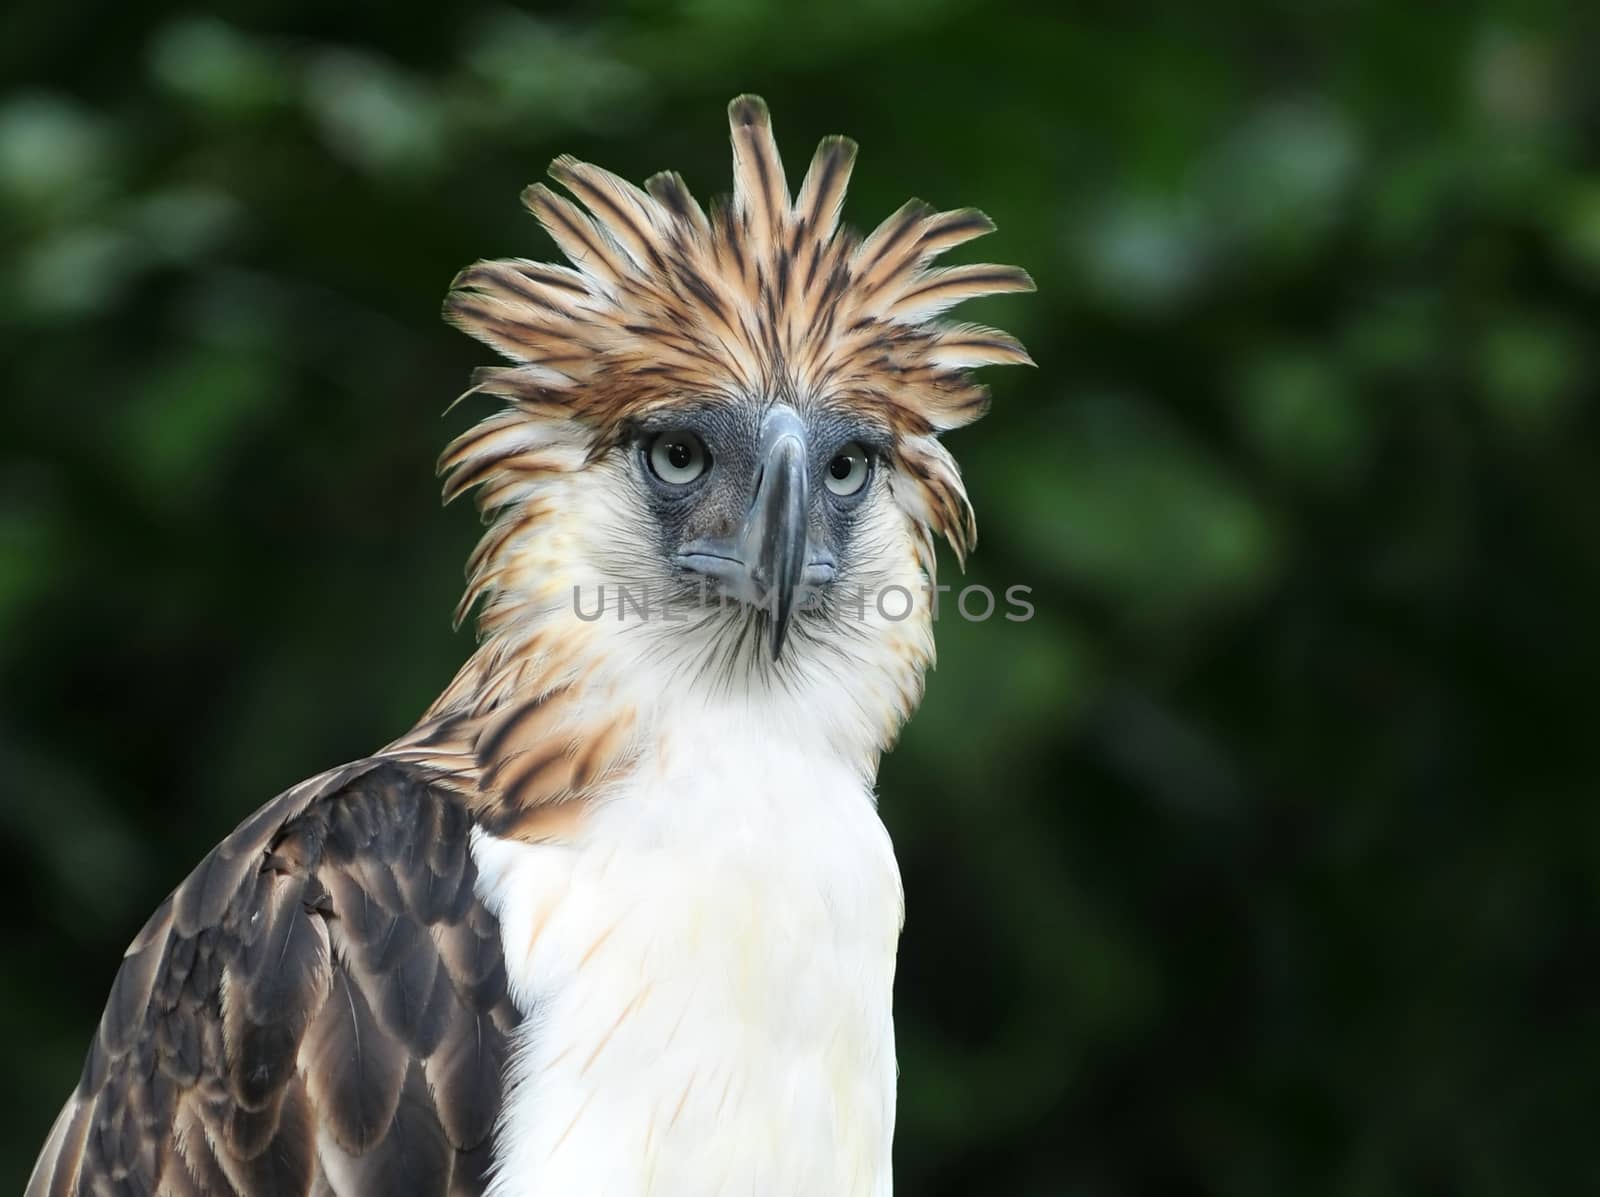 The Philippine Eagle is also known as a monkey-eating eagle, an endangered species in Davao, Philippines